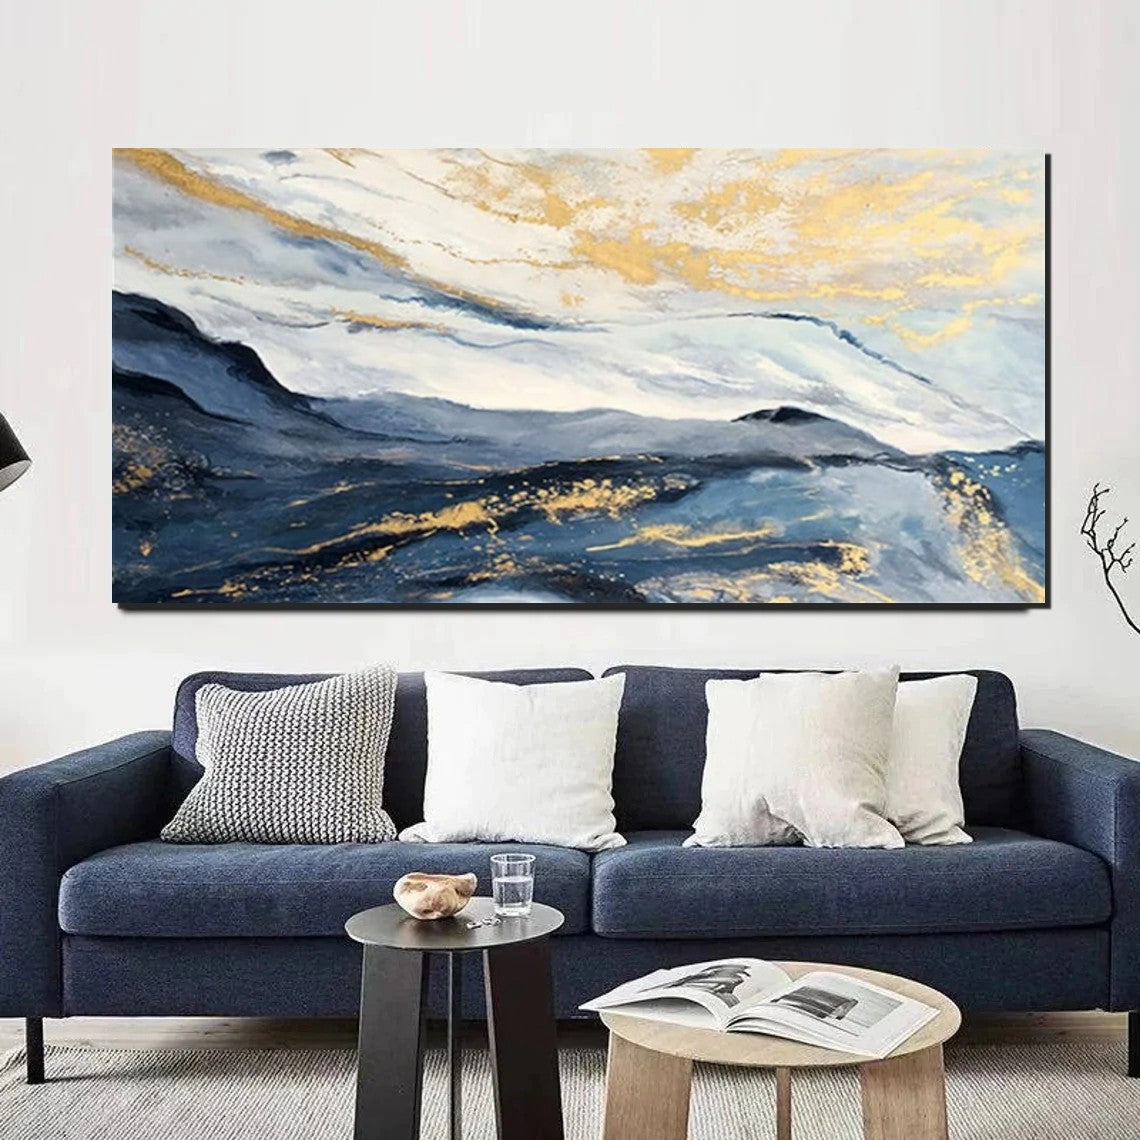 Large Painting on Canvas, Living Room Wall Art Paintings, Acrylic Abstract Painting Behind Couch, Buy Paintings Online, Simple Acrylic Painting Ideas-LargePaintingArt.com